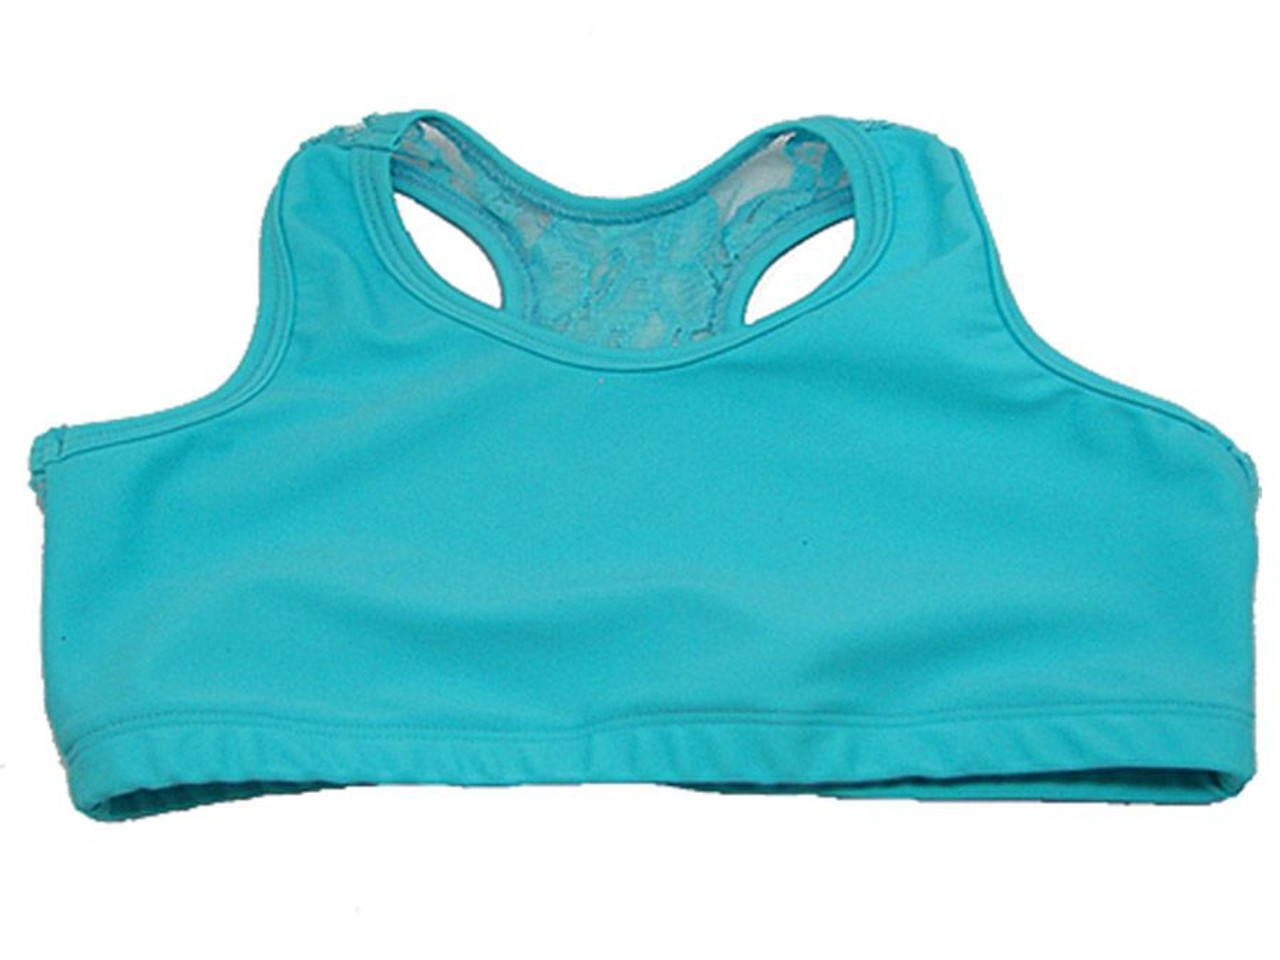 Turquoise Lace Bra Top - Pink Princess